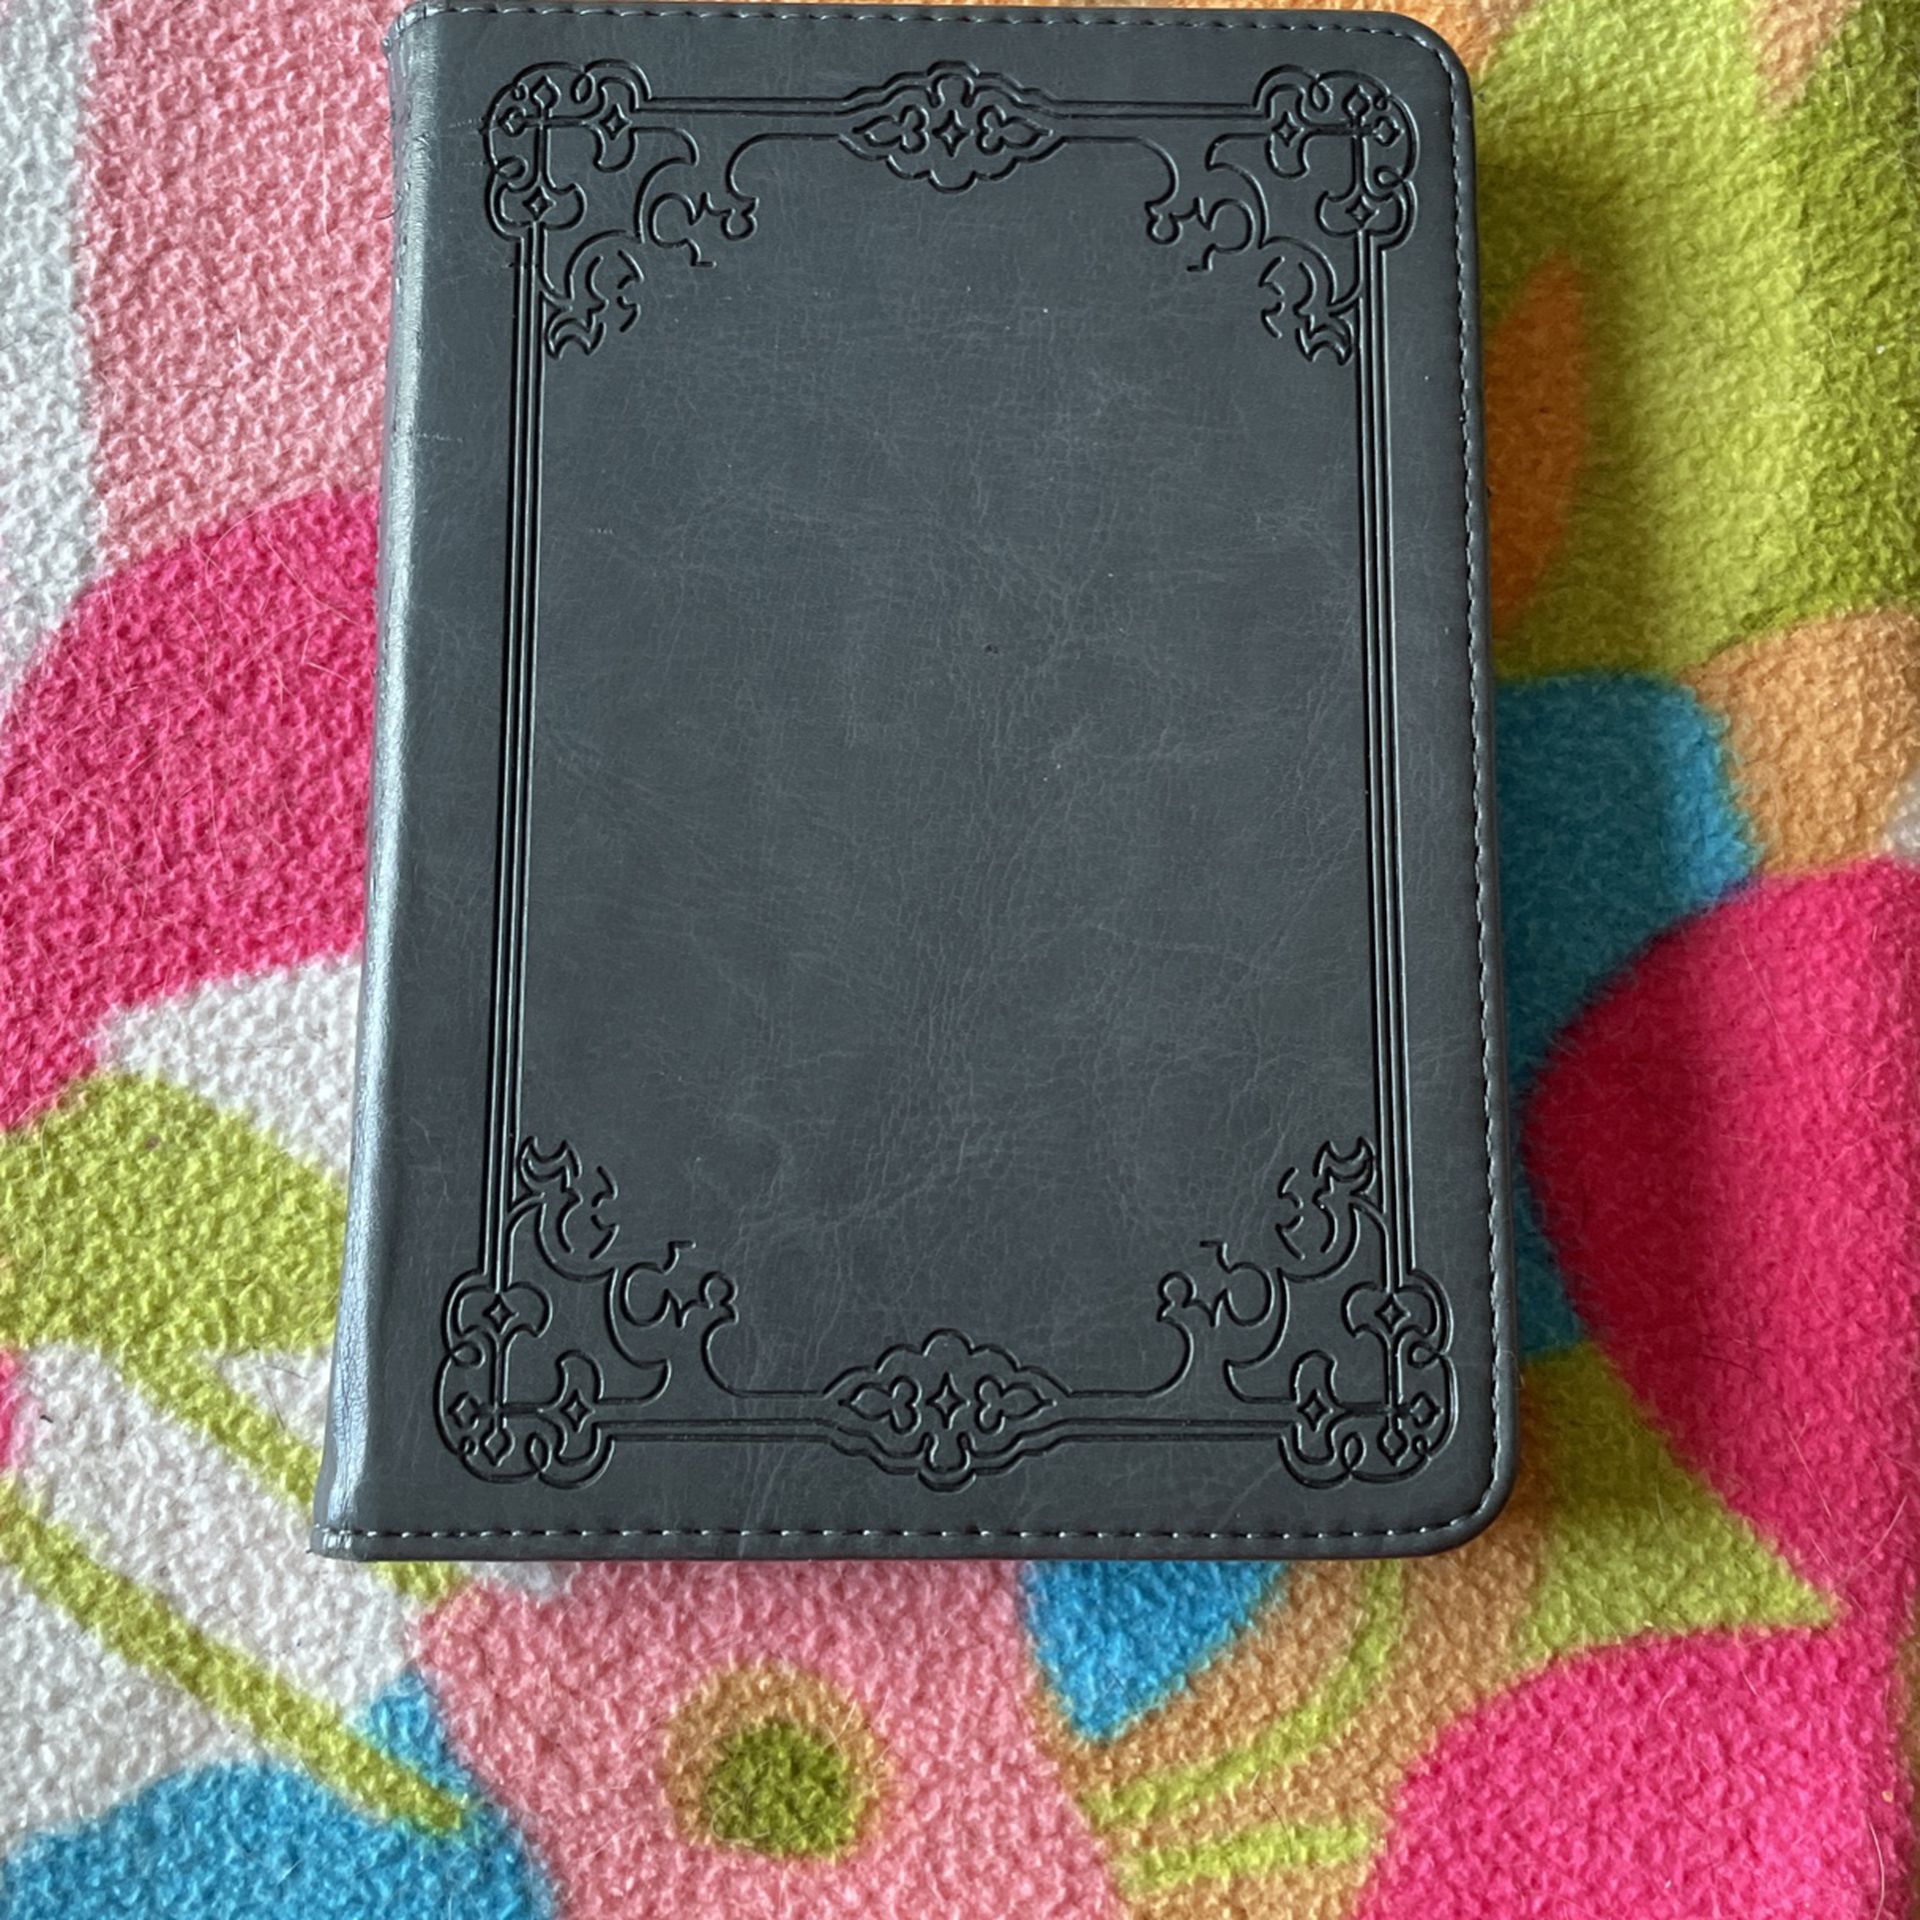 Kindle Paperwhite Case Made By Finite